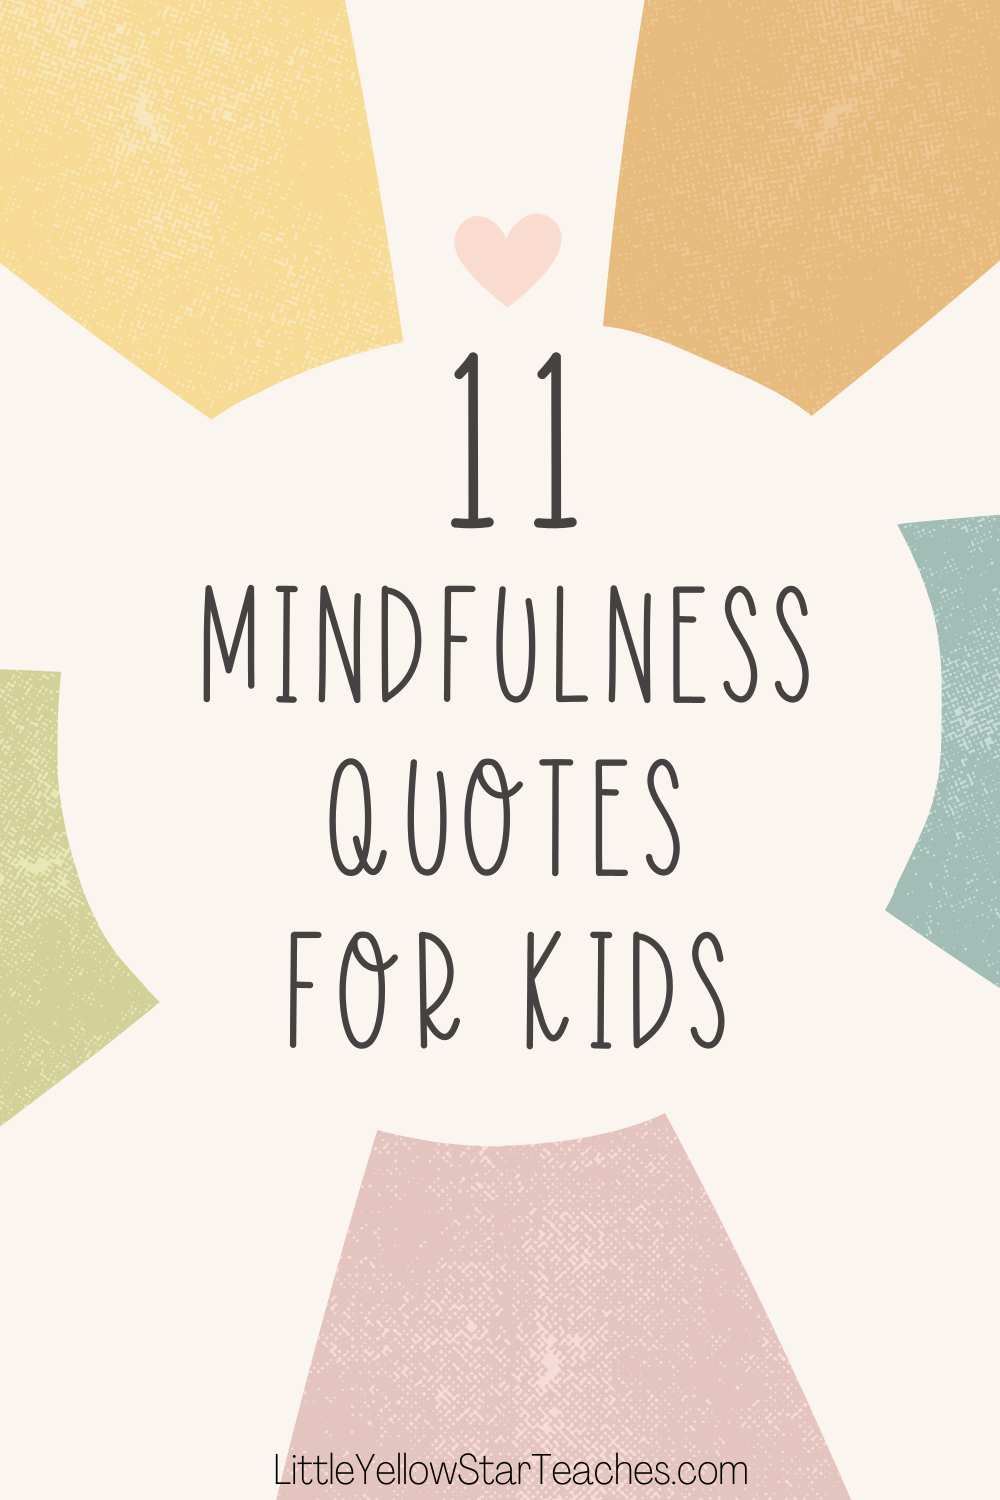 Mindfulness Quotes For Kids